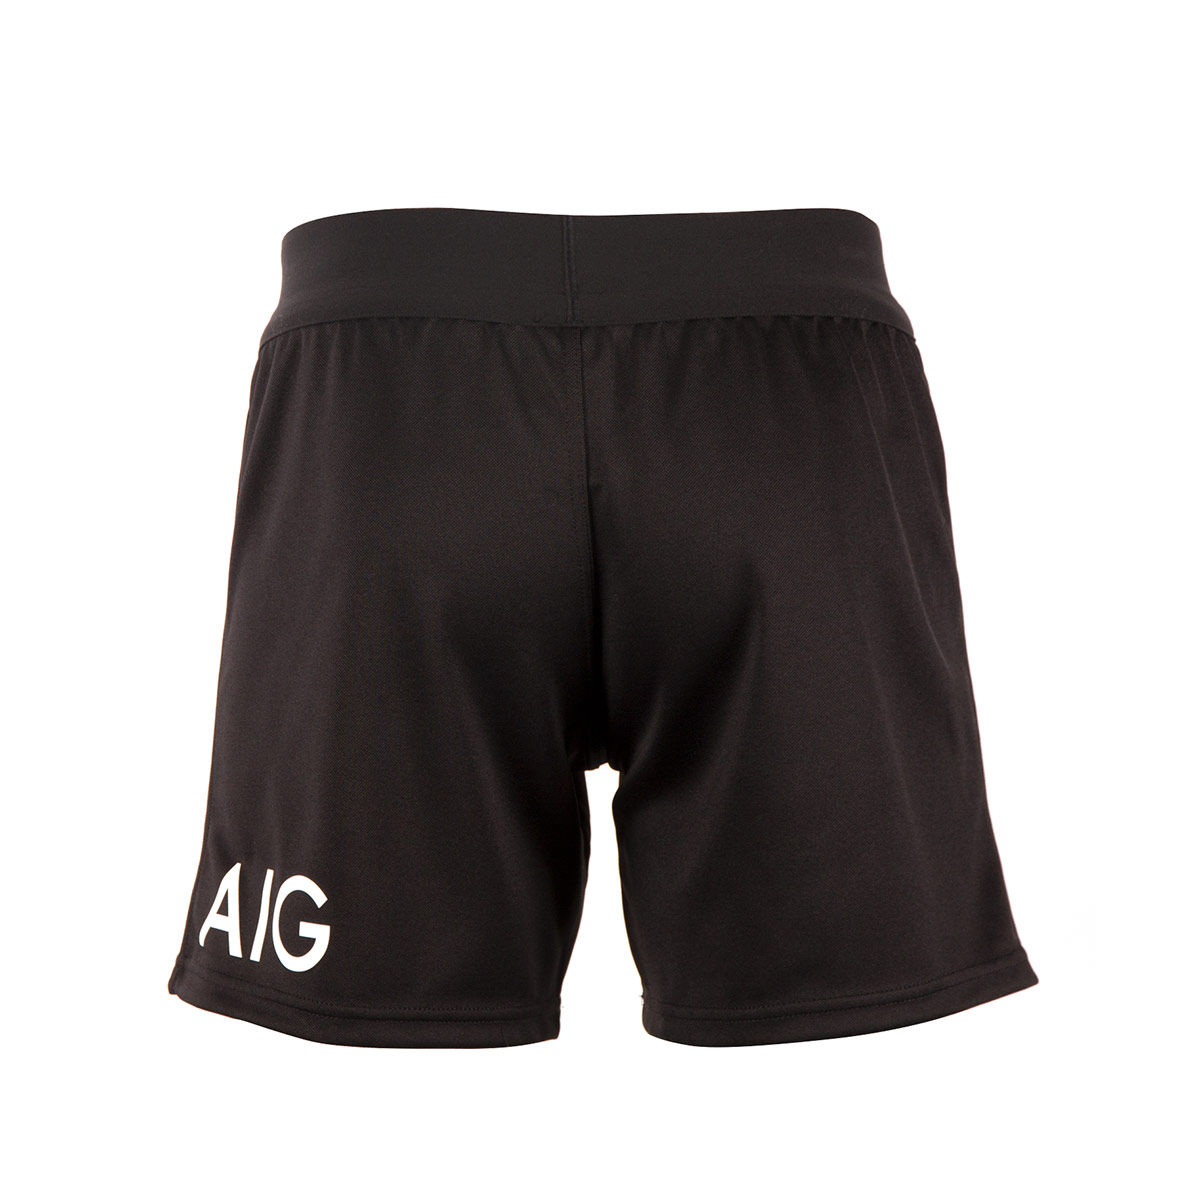 2019 Mens All Blacks Home Rugby Shorts | rugbystore